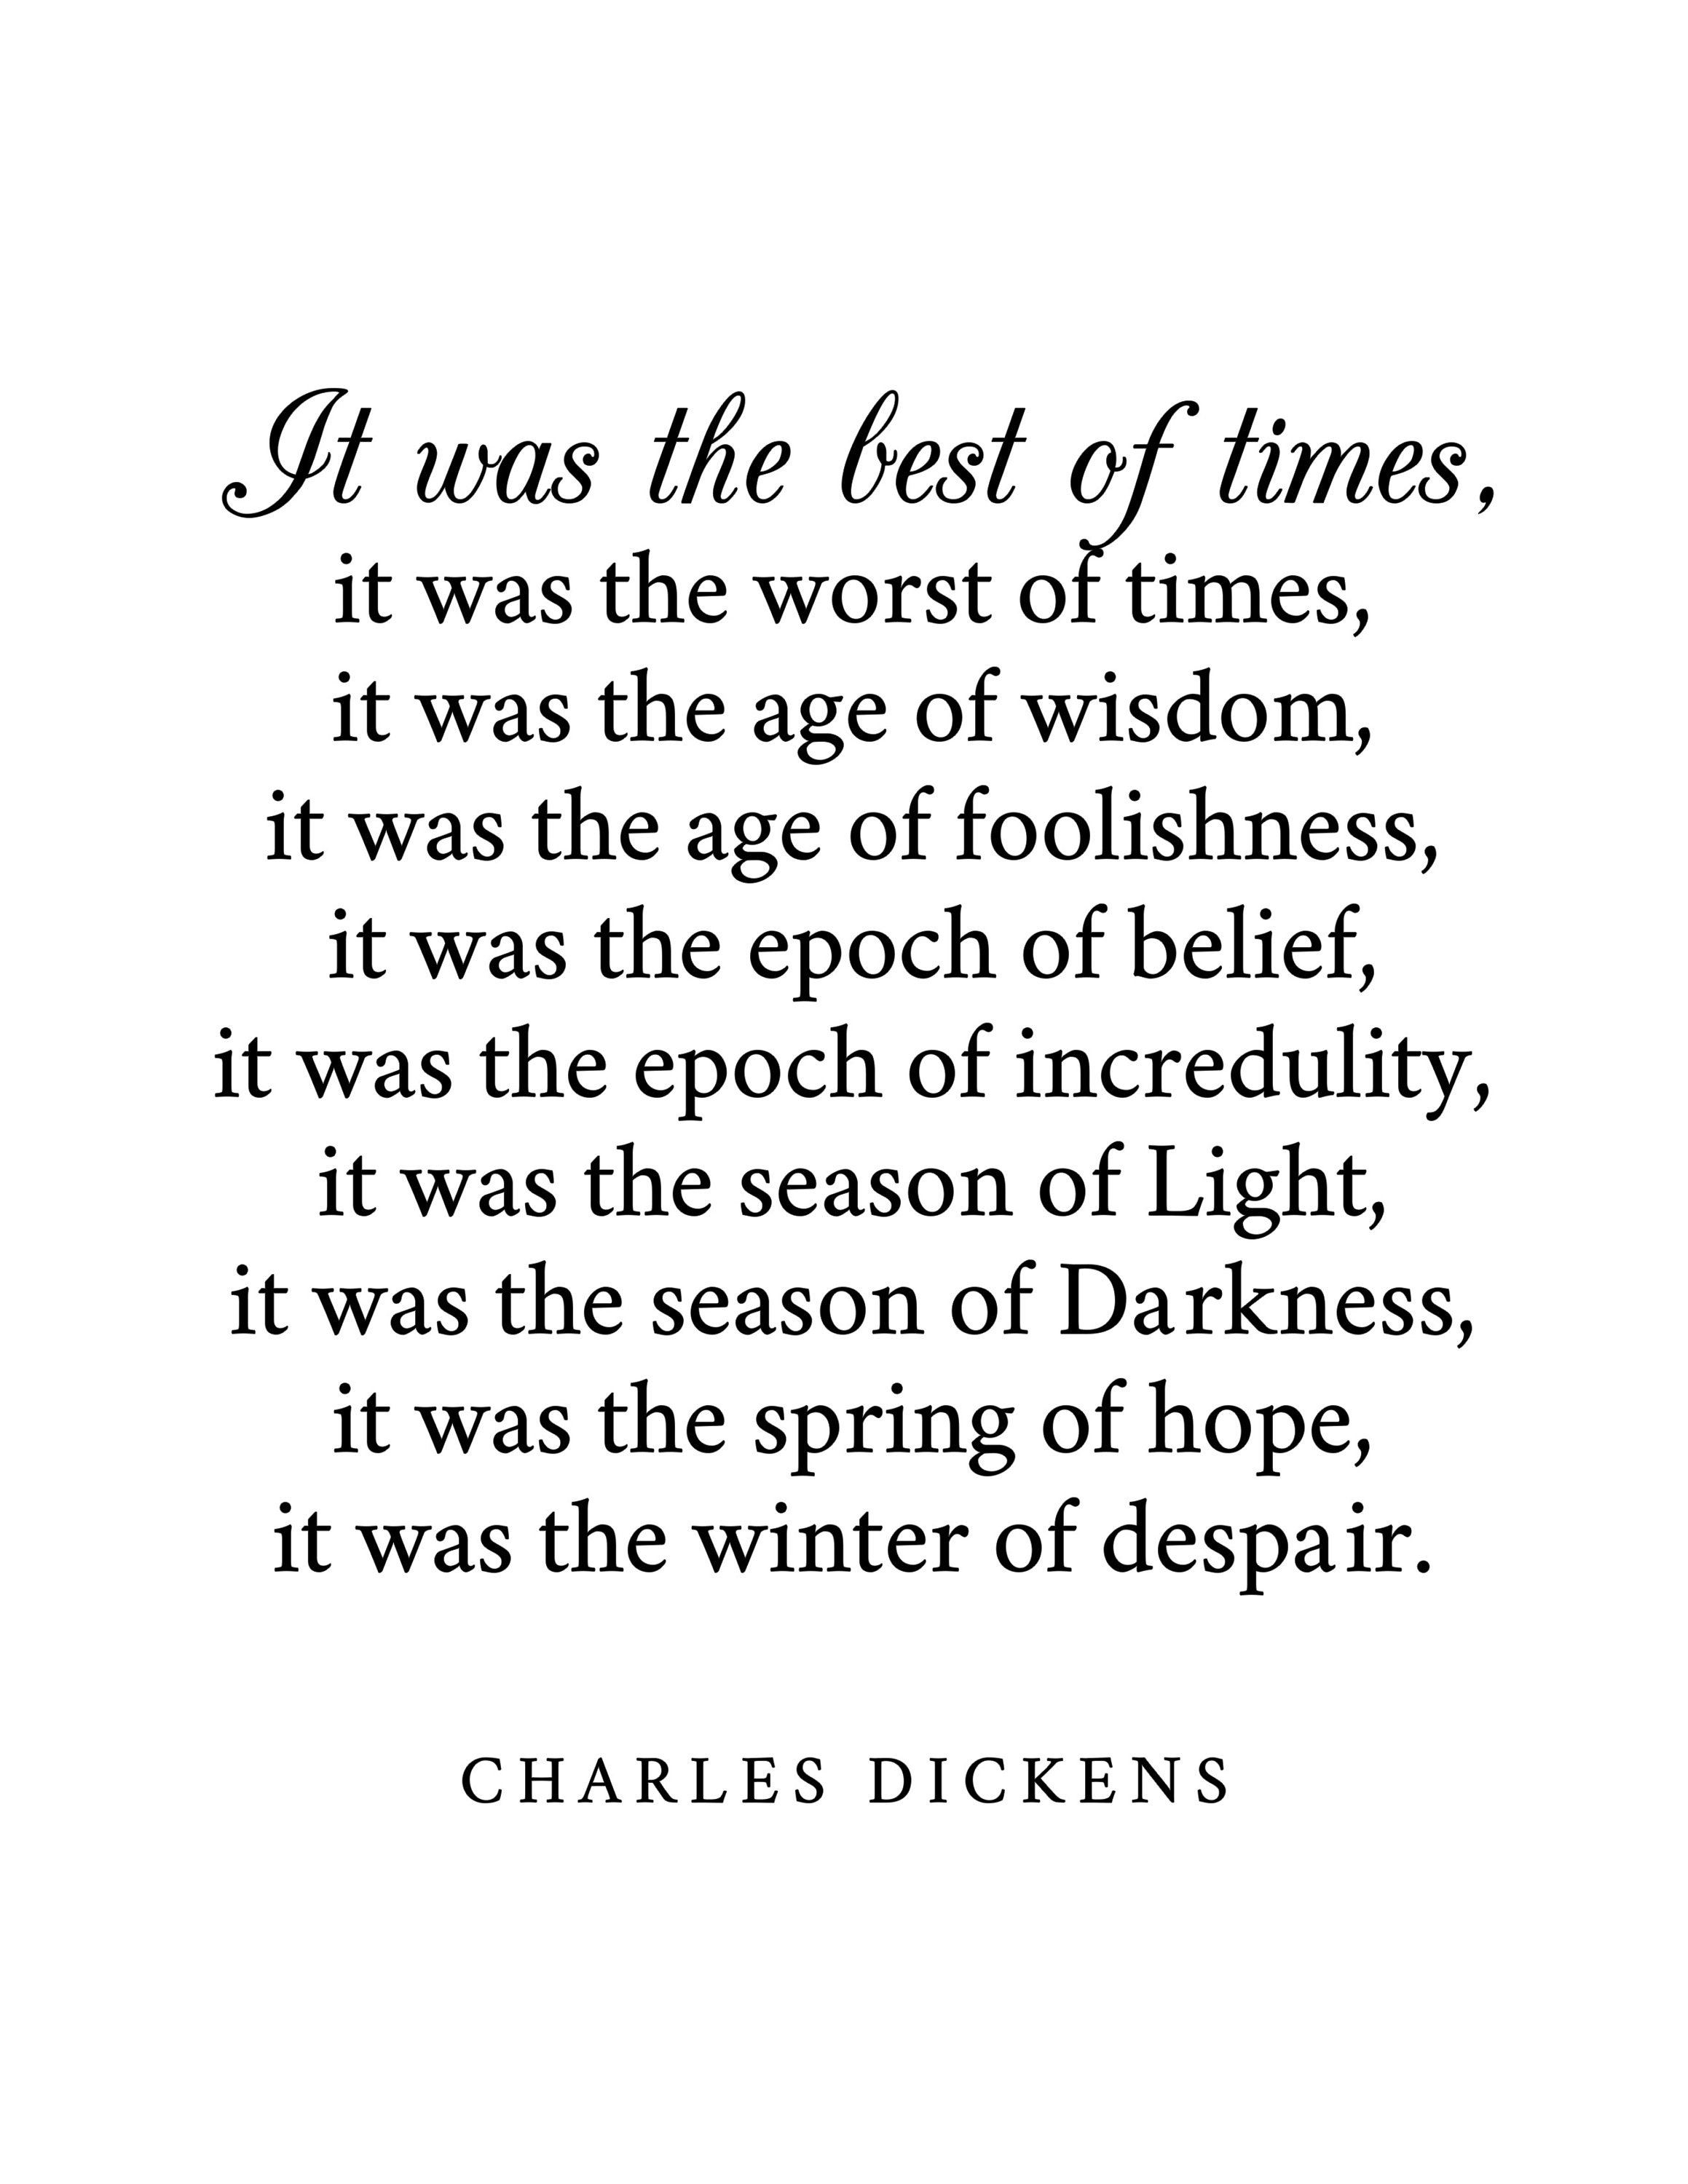 Charles Dickens quote: It was the best of times, it was the worst